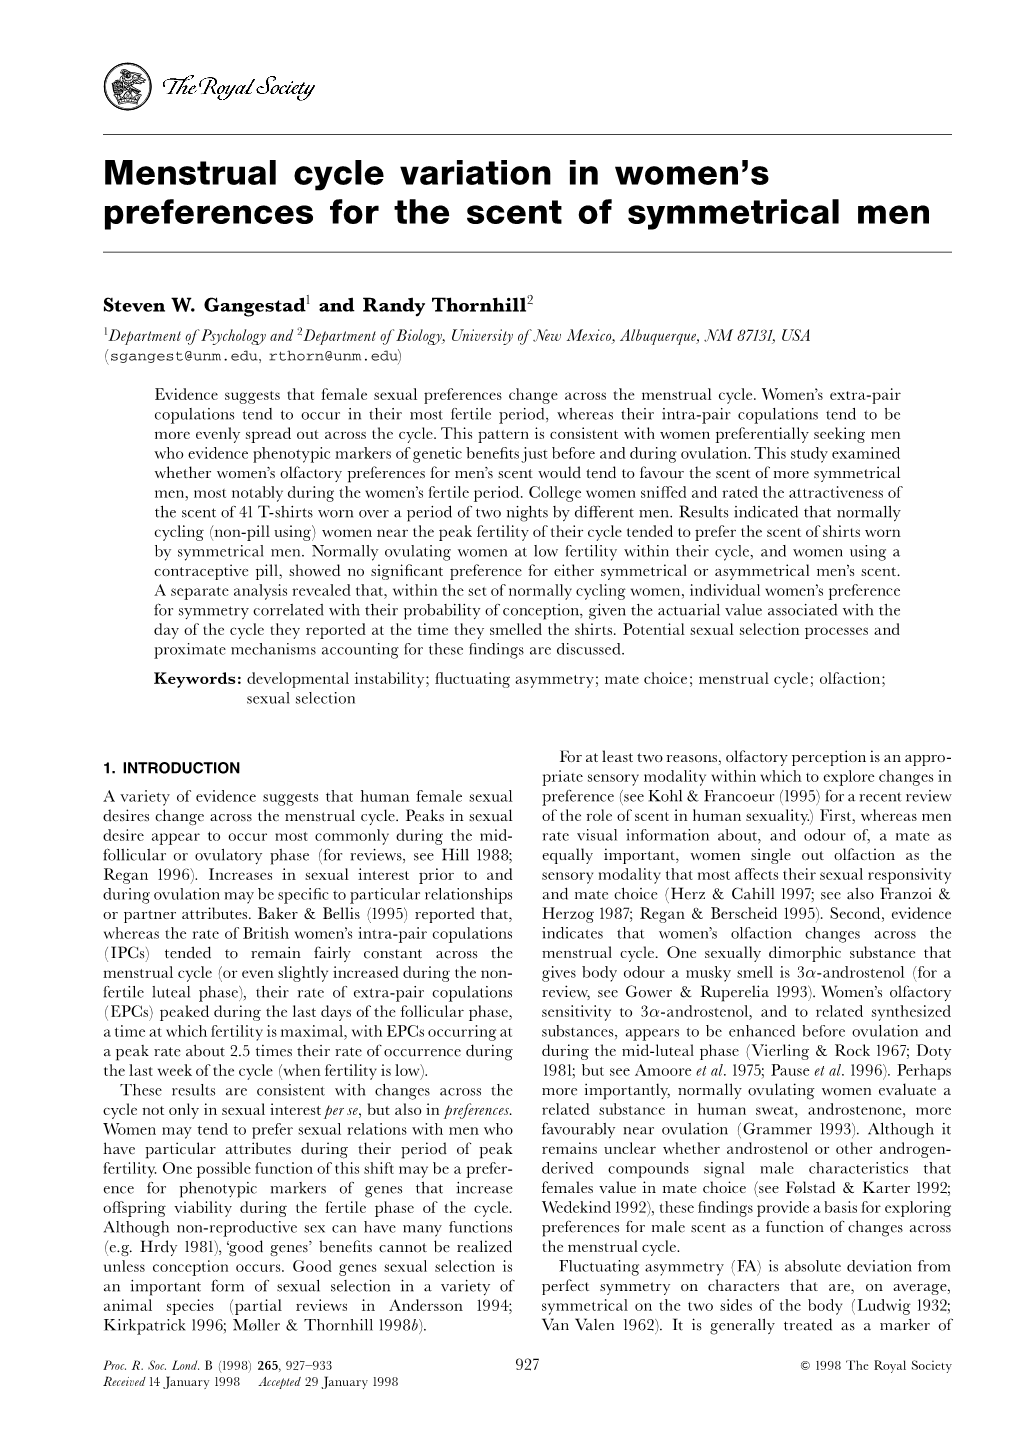 Menstrual Cycle Variation in Women's Preferences for the Scent of Symmetrical Men